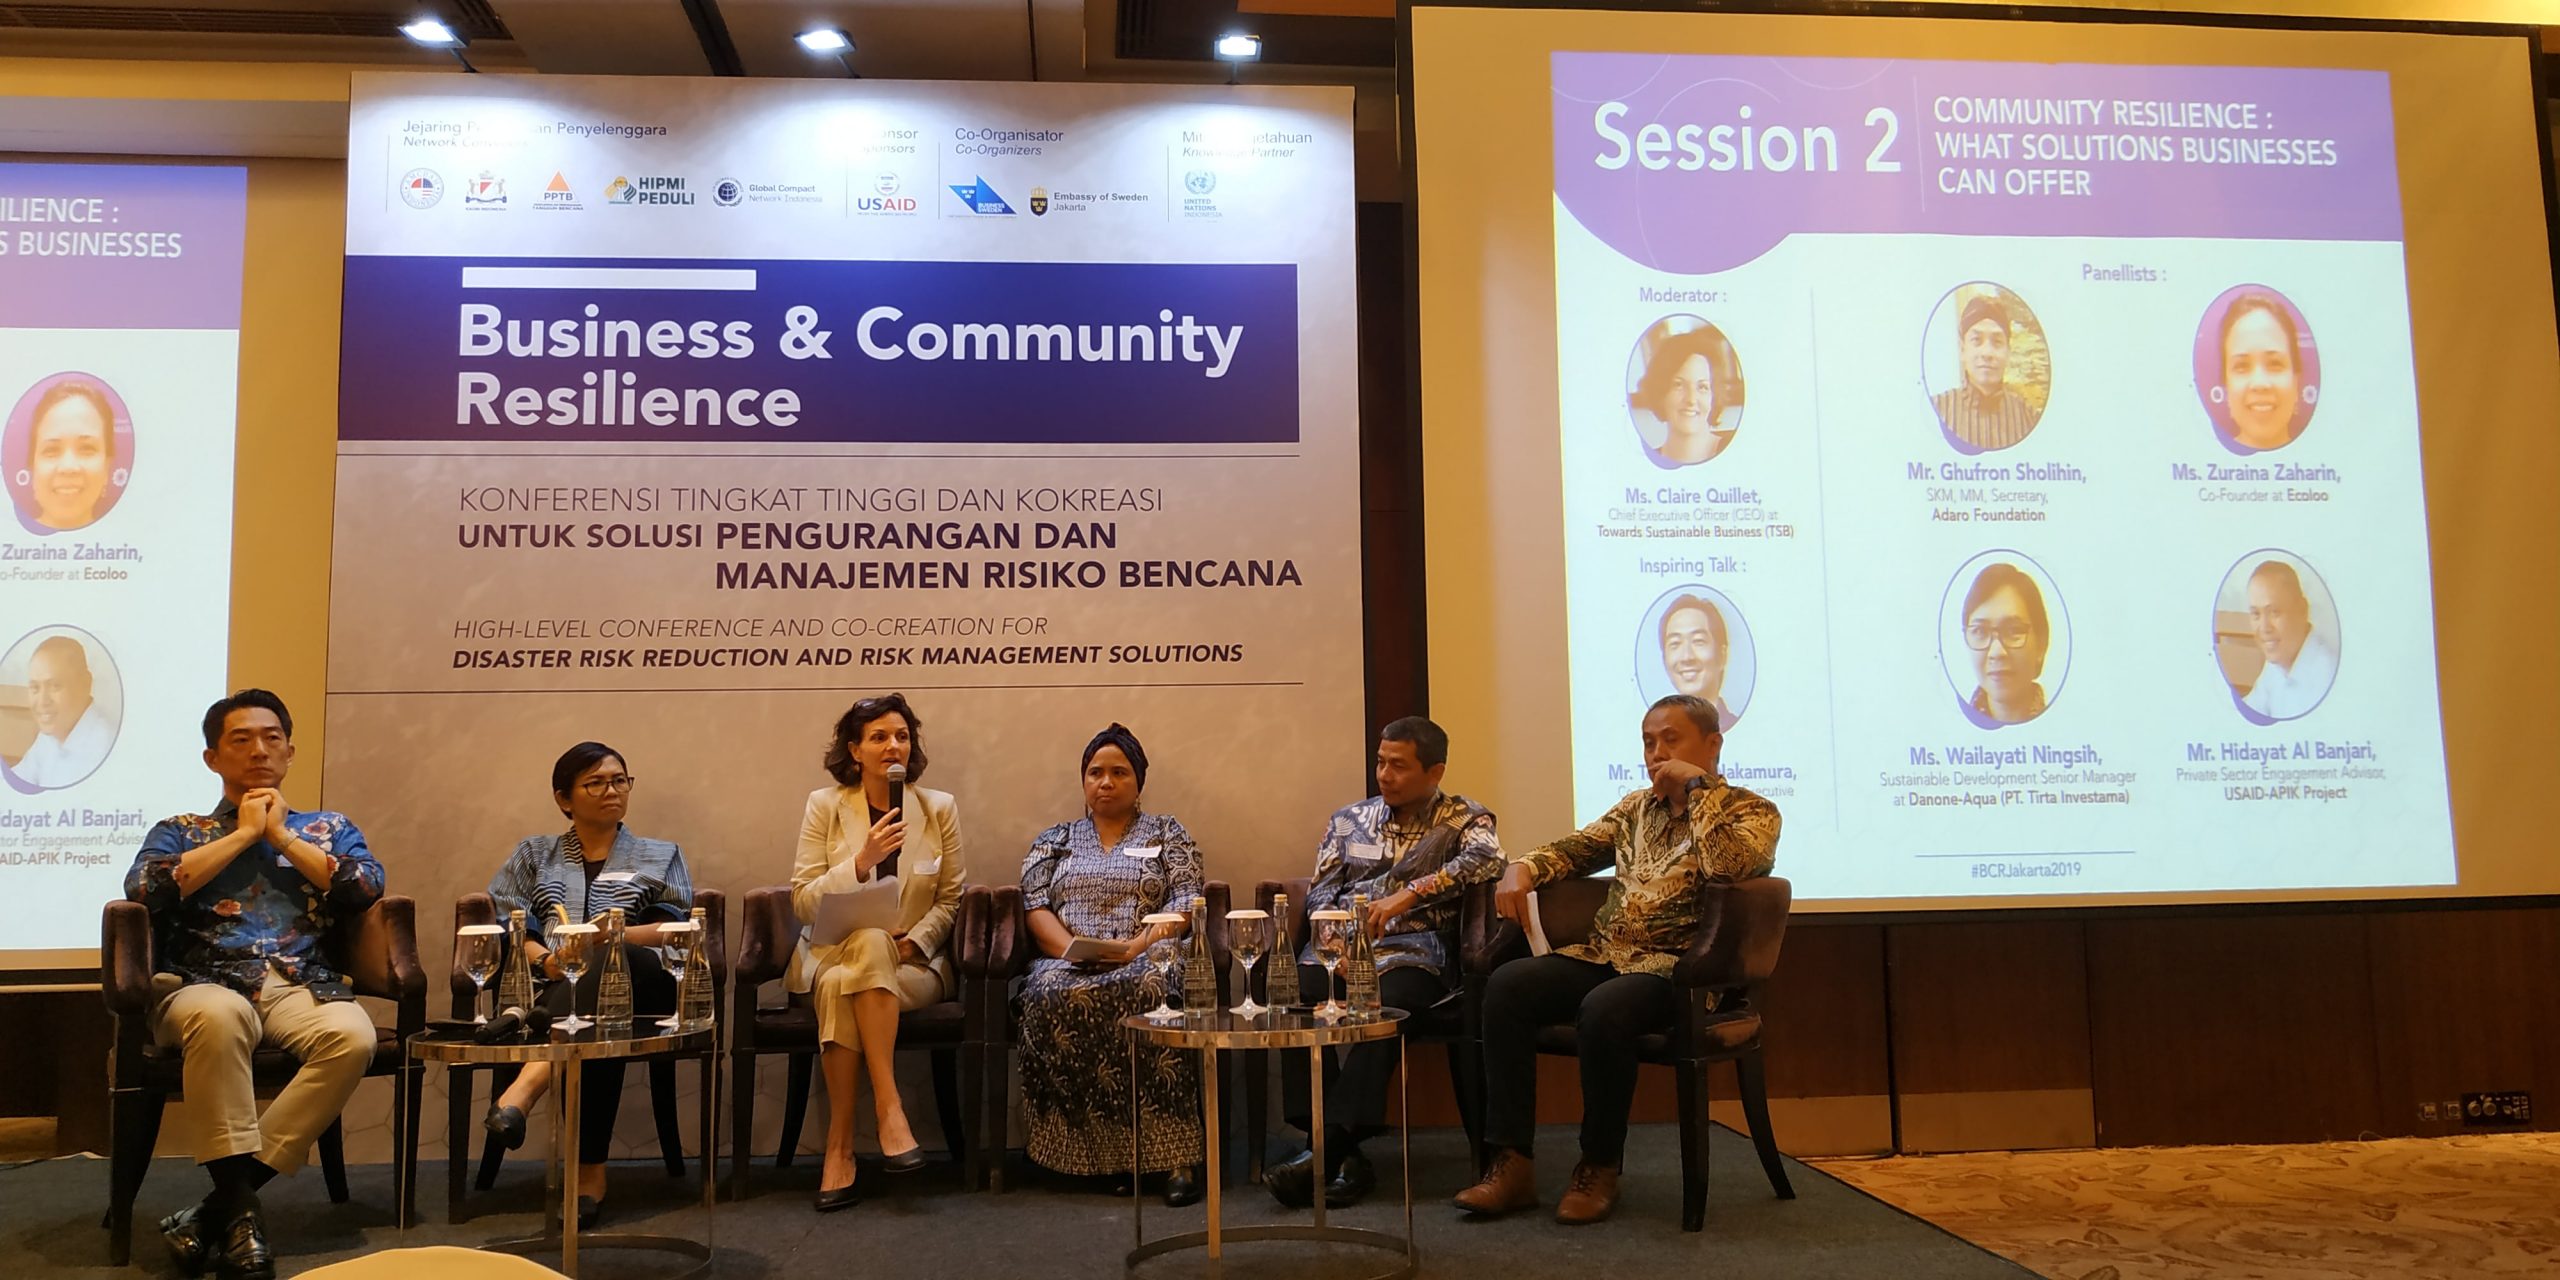 Oct 23, 2019 – UNICEF Business & Community Resilience Conference